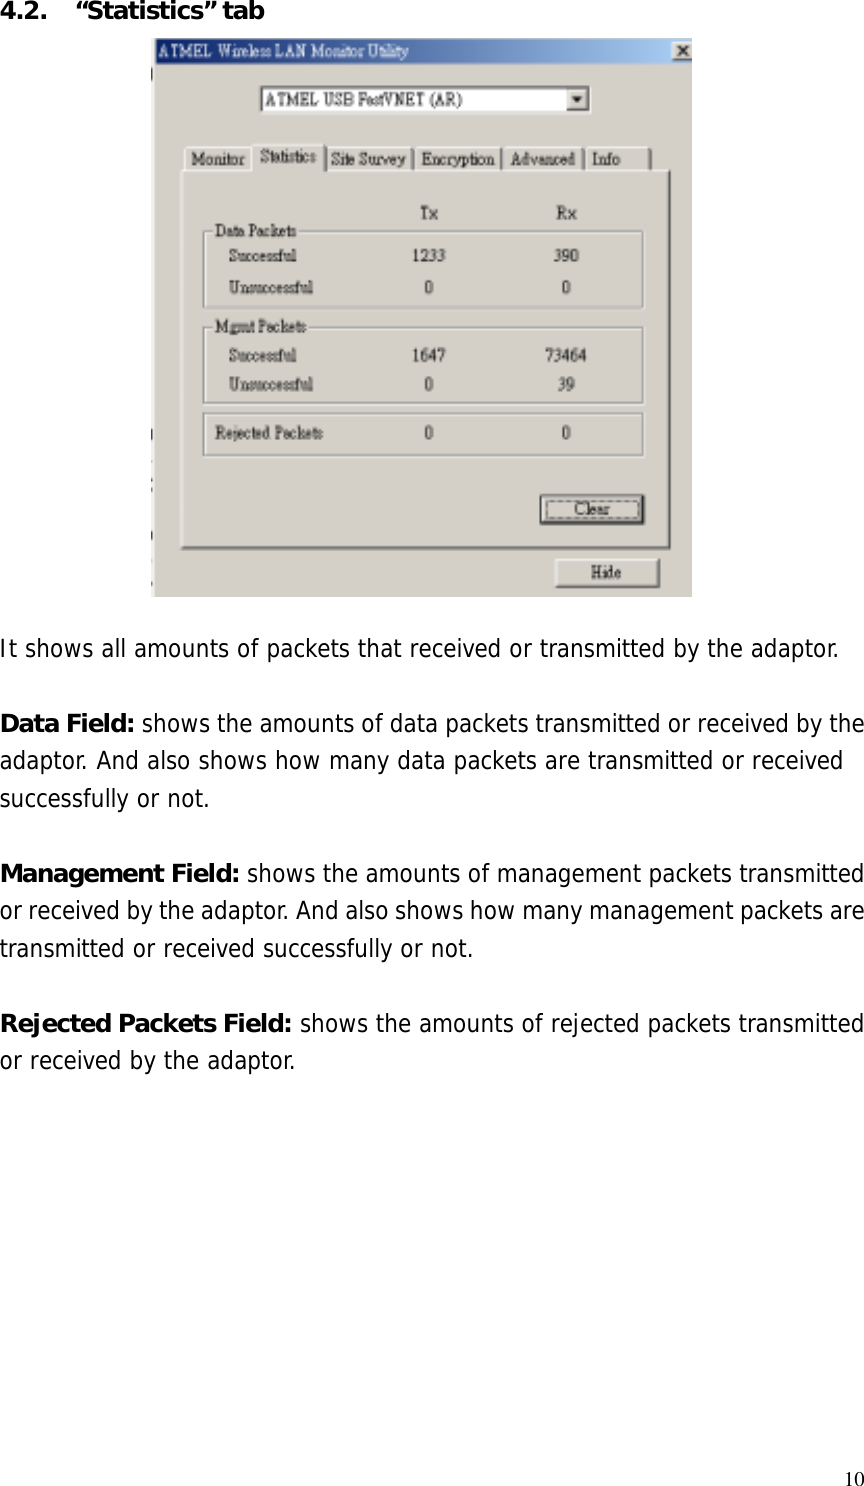  104.2. “Statistics” tab It shows all amounts of packets that received or transmitted by the adaptor.  Data Field: shows the amounts of data packets transmitted or received by the adaptor. And also shows how many data packets are transmitted or received successfully or not.  Management Field: shows the amounts of management packets transmitted or received by the adaptor. And also shows how many management packets are transmitted or received successfully or not.  Rejected Packets Field: shows the amounts of rejected packets transmitted or received by the adaptor.   